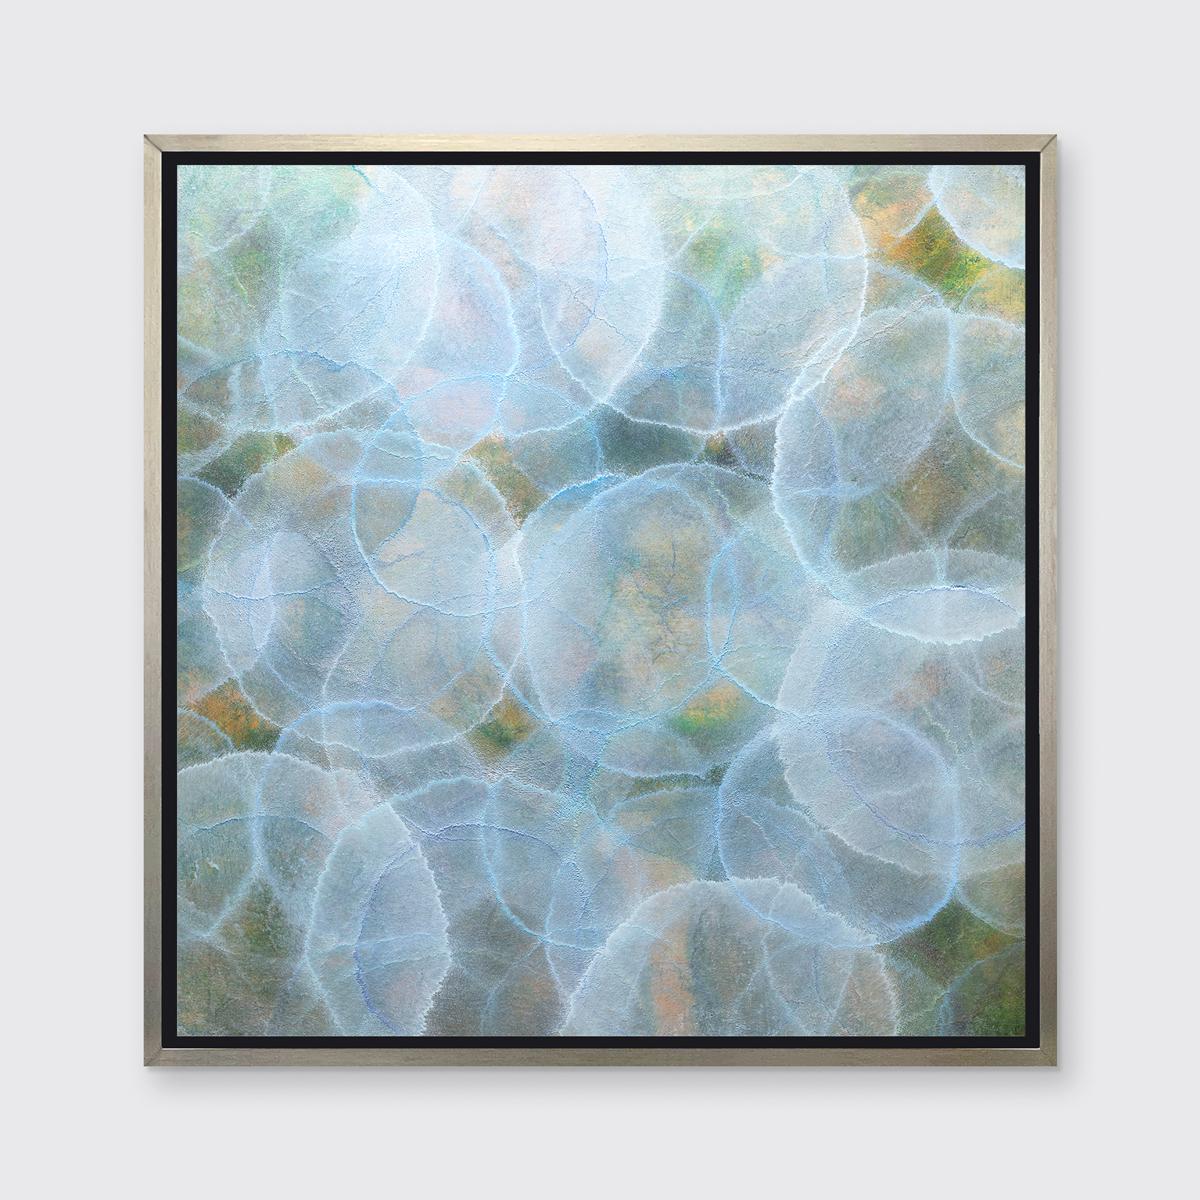 This abstract limited edition print by Roger Mudre features light, translucent circles layered over one another throughout the composition. The under layers are a deep green and yellow, with brighter circles overtop which have a light outline and